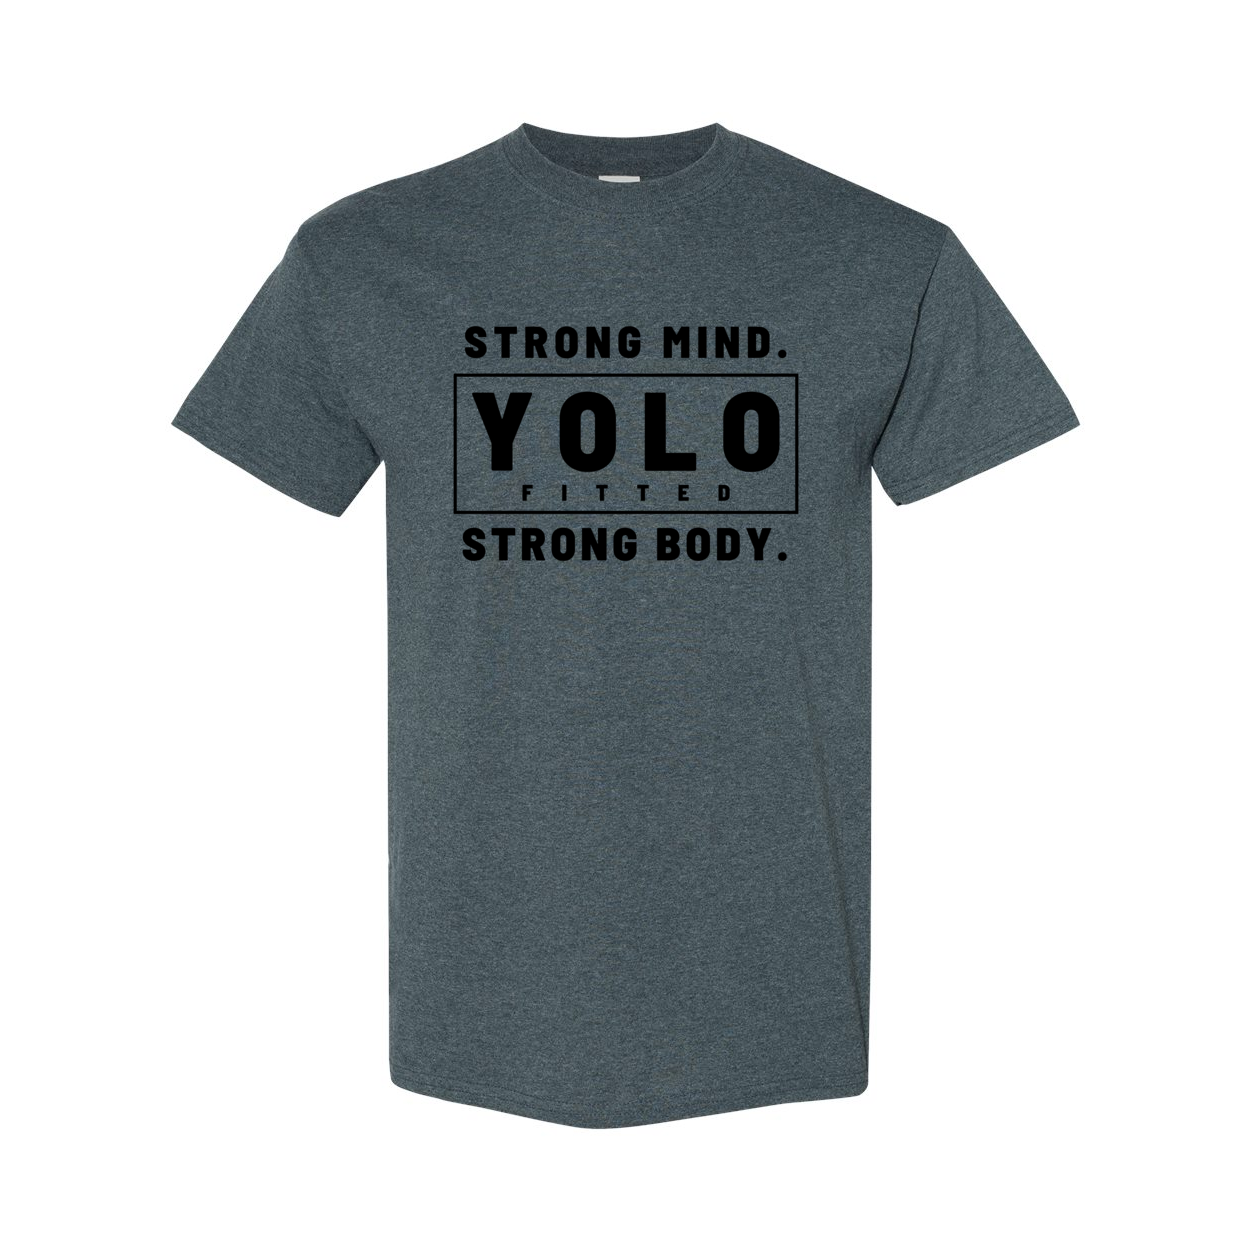 YOLO FITTED'S UNISEX "BOLD, STRONG MIND STRONG BODY" TEE